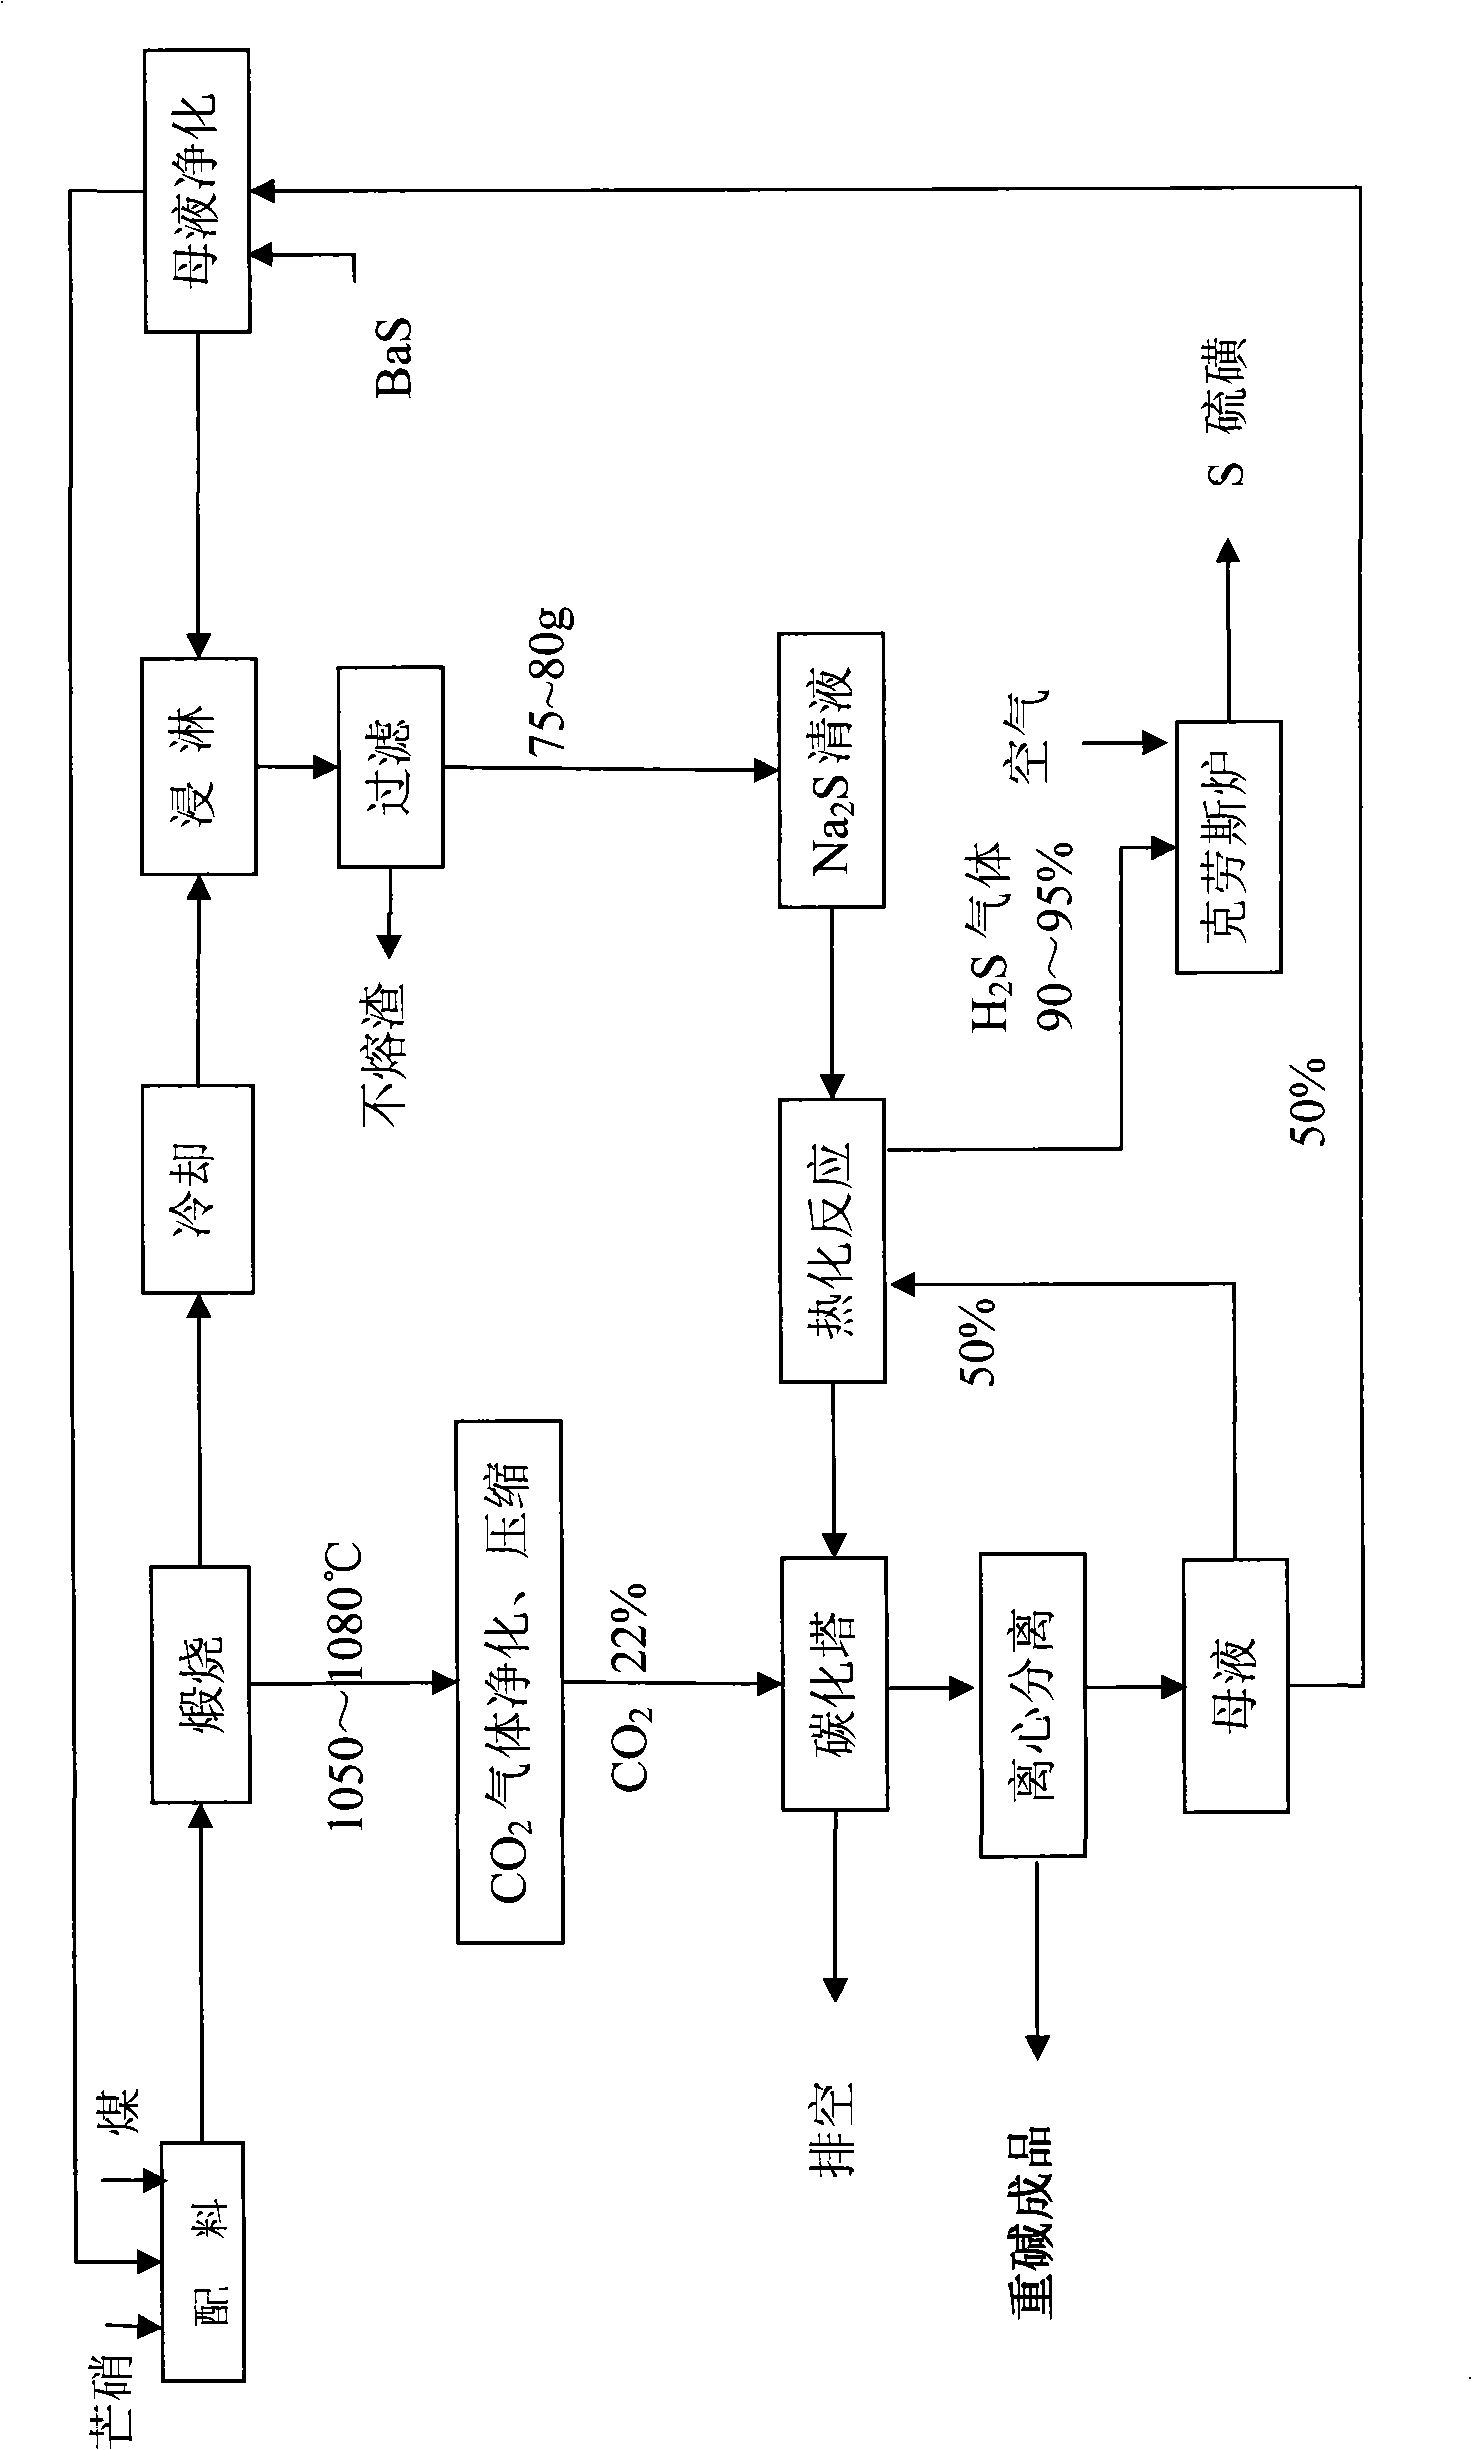 Method for producing sodium bicarbonate and sulfur from mirabilite by wet process